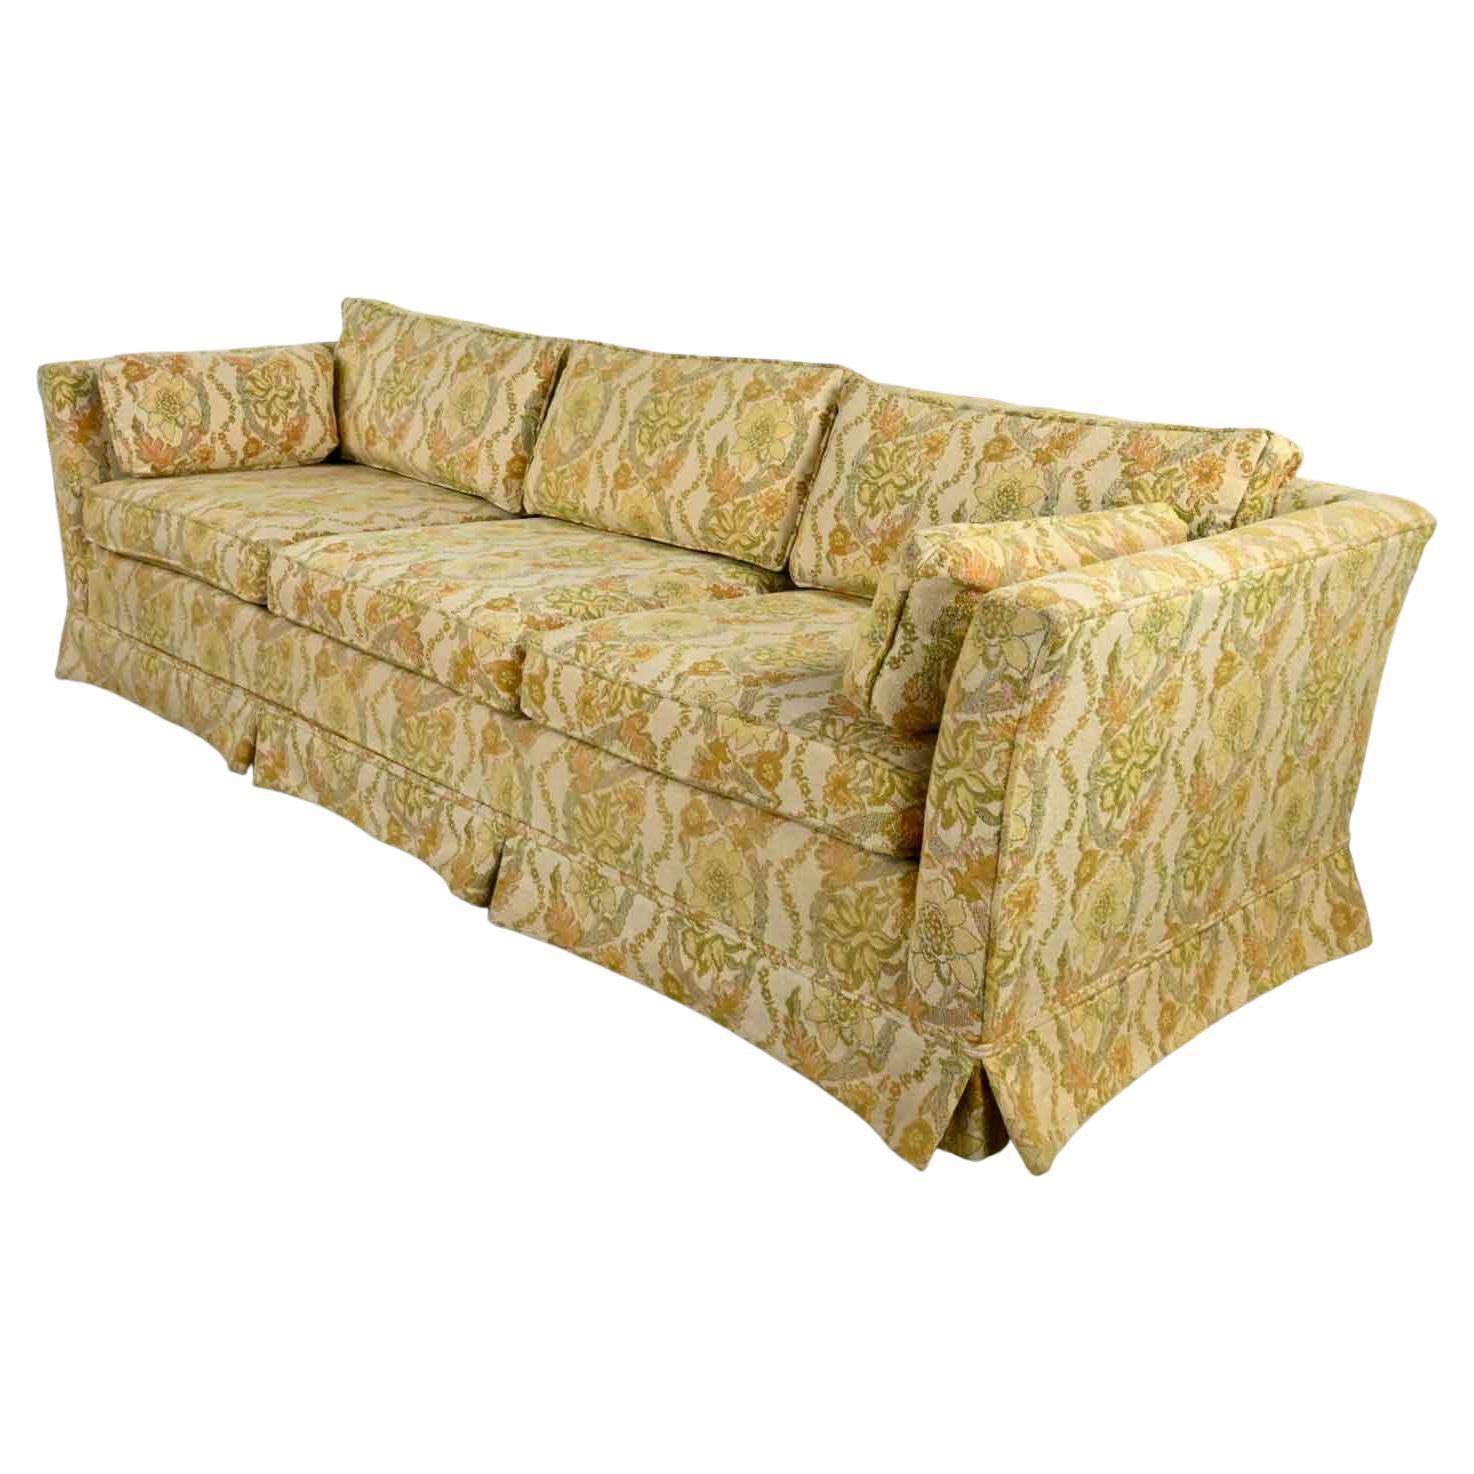 MCM Broyhill Furn Flared Tuxedo Sofa Lt Yellow Floral Fabric by Lenoir Chair Co. For Sale